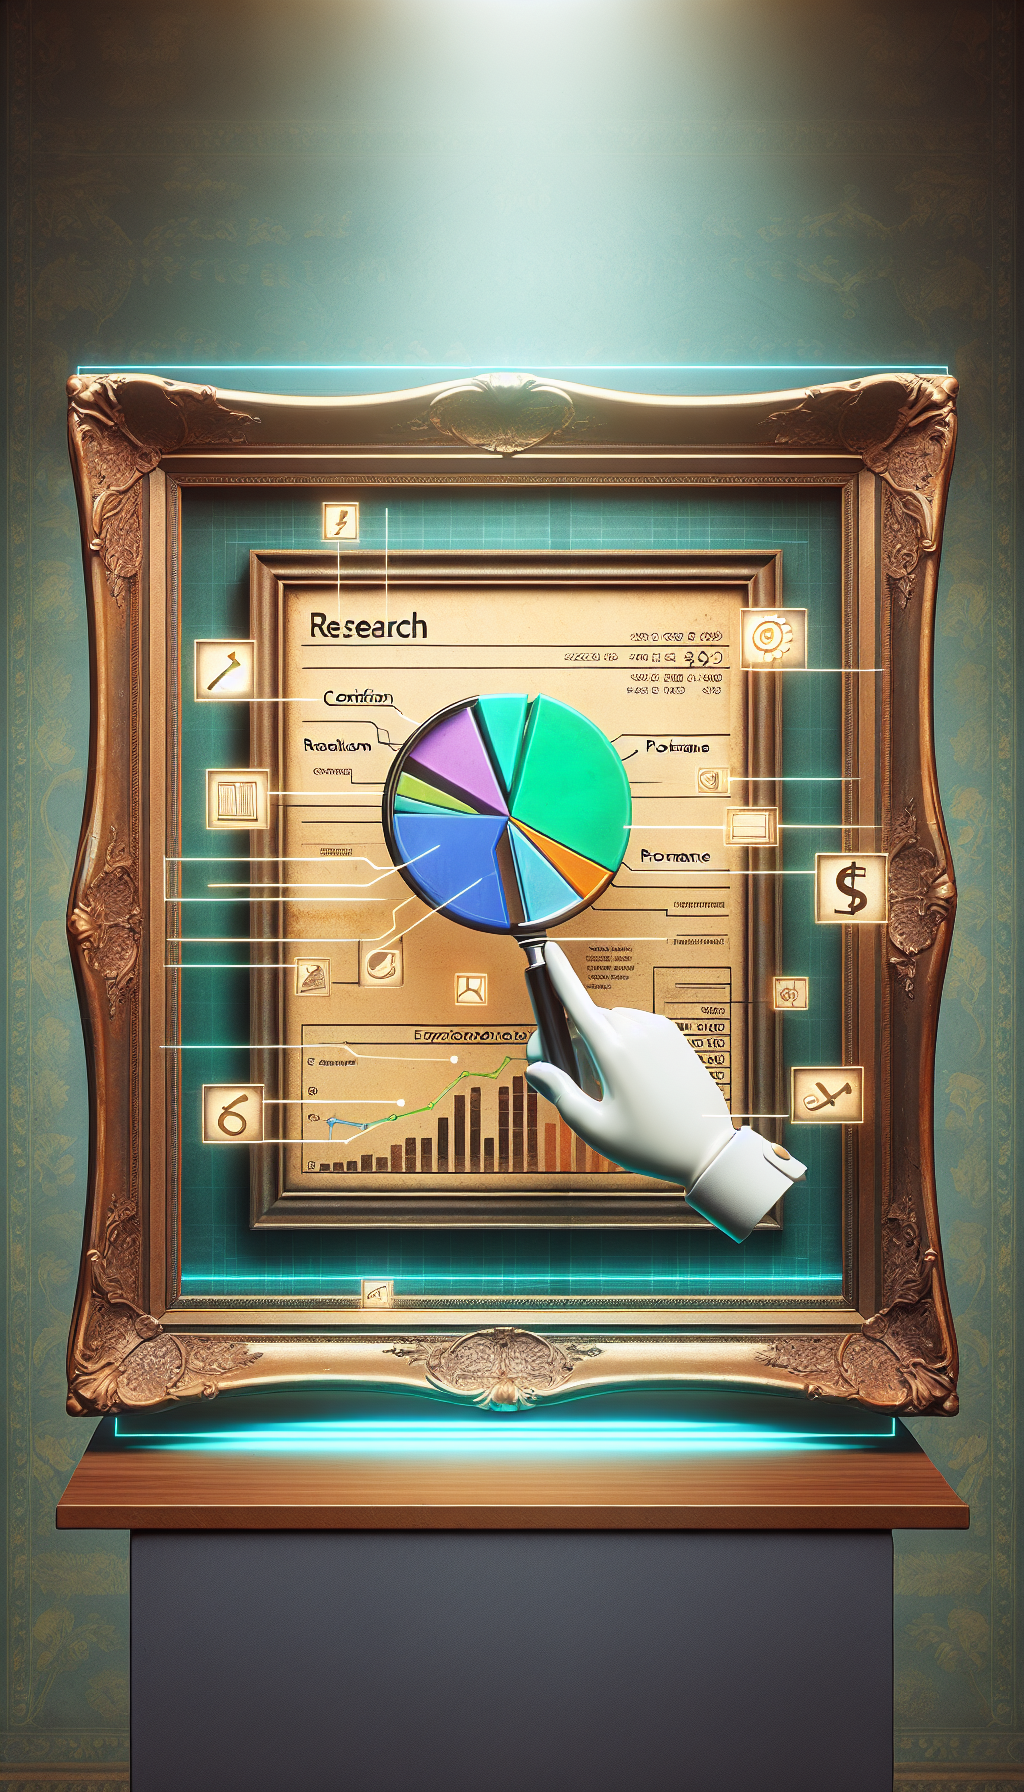 A digital tablet framed within a classic ornate picture frame displays a vibrant, 3D pie chart with segments labeled "Research," "Condition," "Provenance," etc., as a magnifying glass hovers above, insinuating scrutiny. Elegant, ghosted currency symbols fade in the backdrop, underscoring the free appraisal concept, while a cursor clicks on a prominent "Evaluate" button.